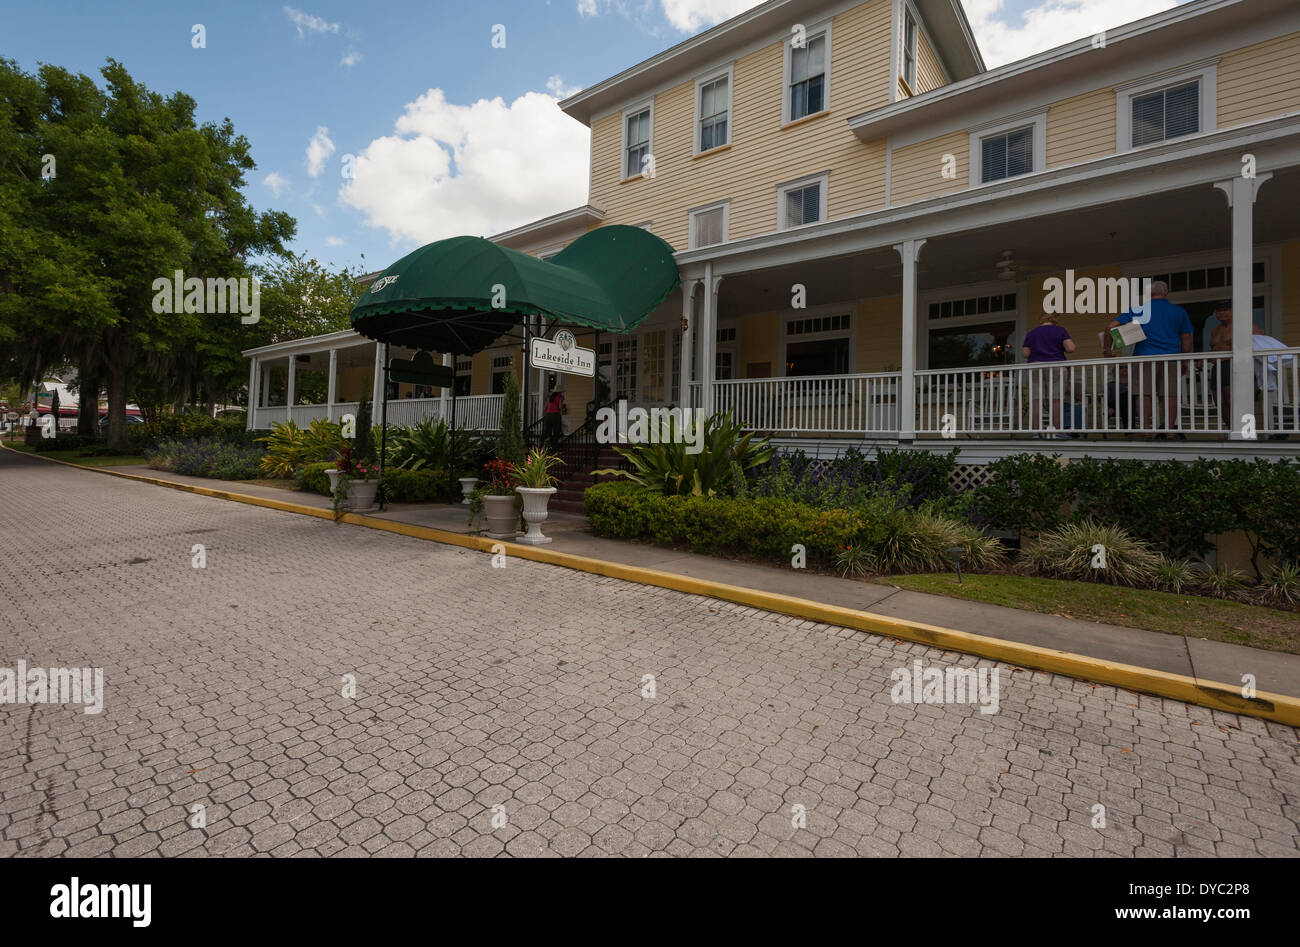 Florida's most historic hotel built in 1883 the Lakeside Inn located in the little historic scenic Town of Mount Dora, Florida Stock Photo